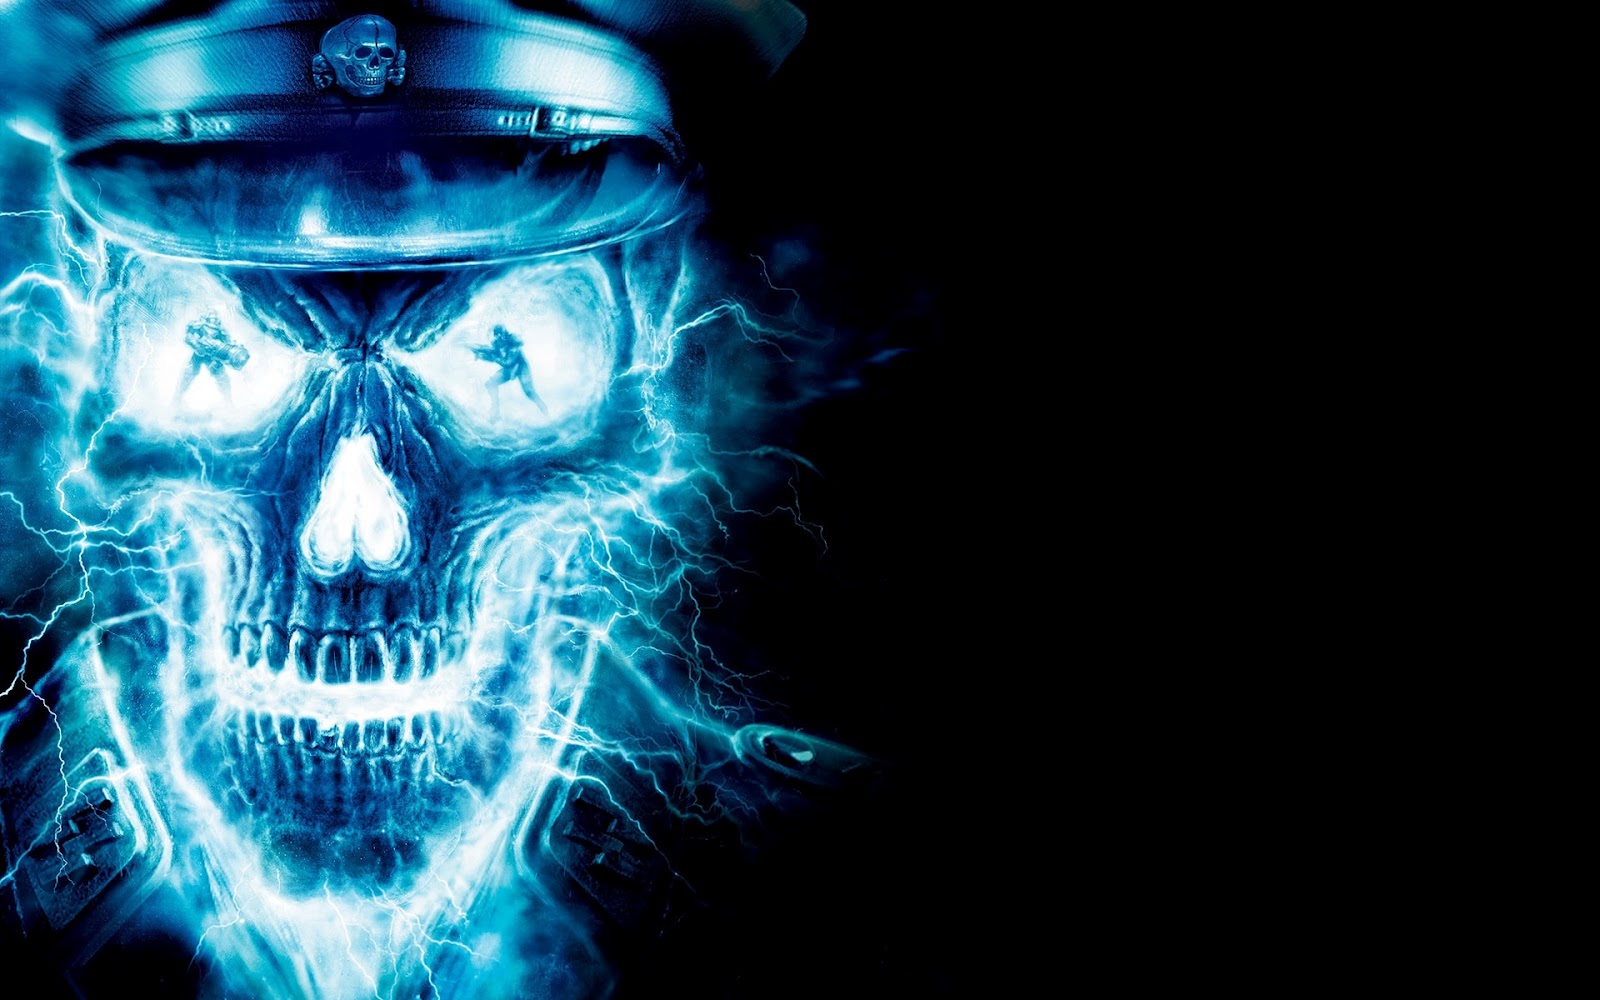 Epic Cool Skull Wallpapers